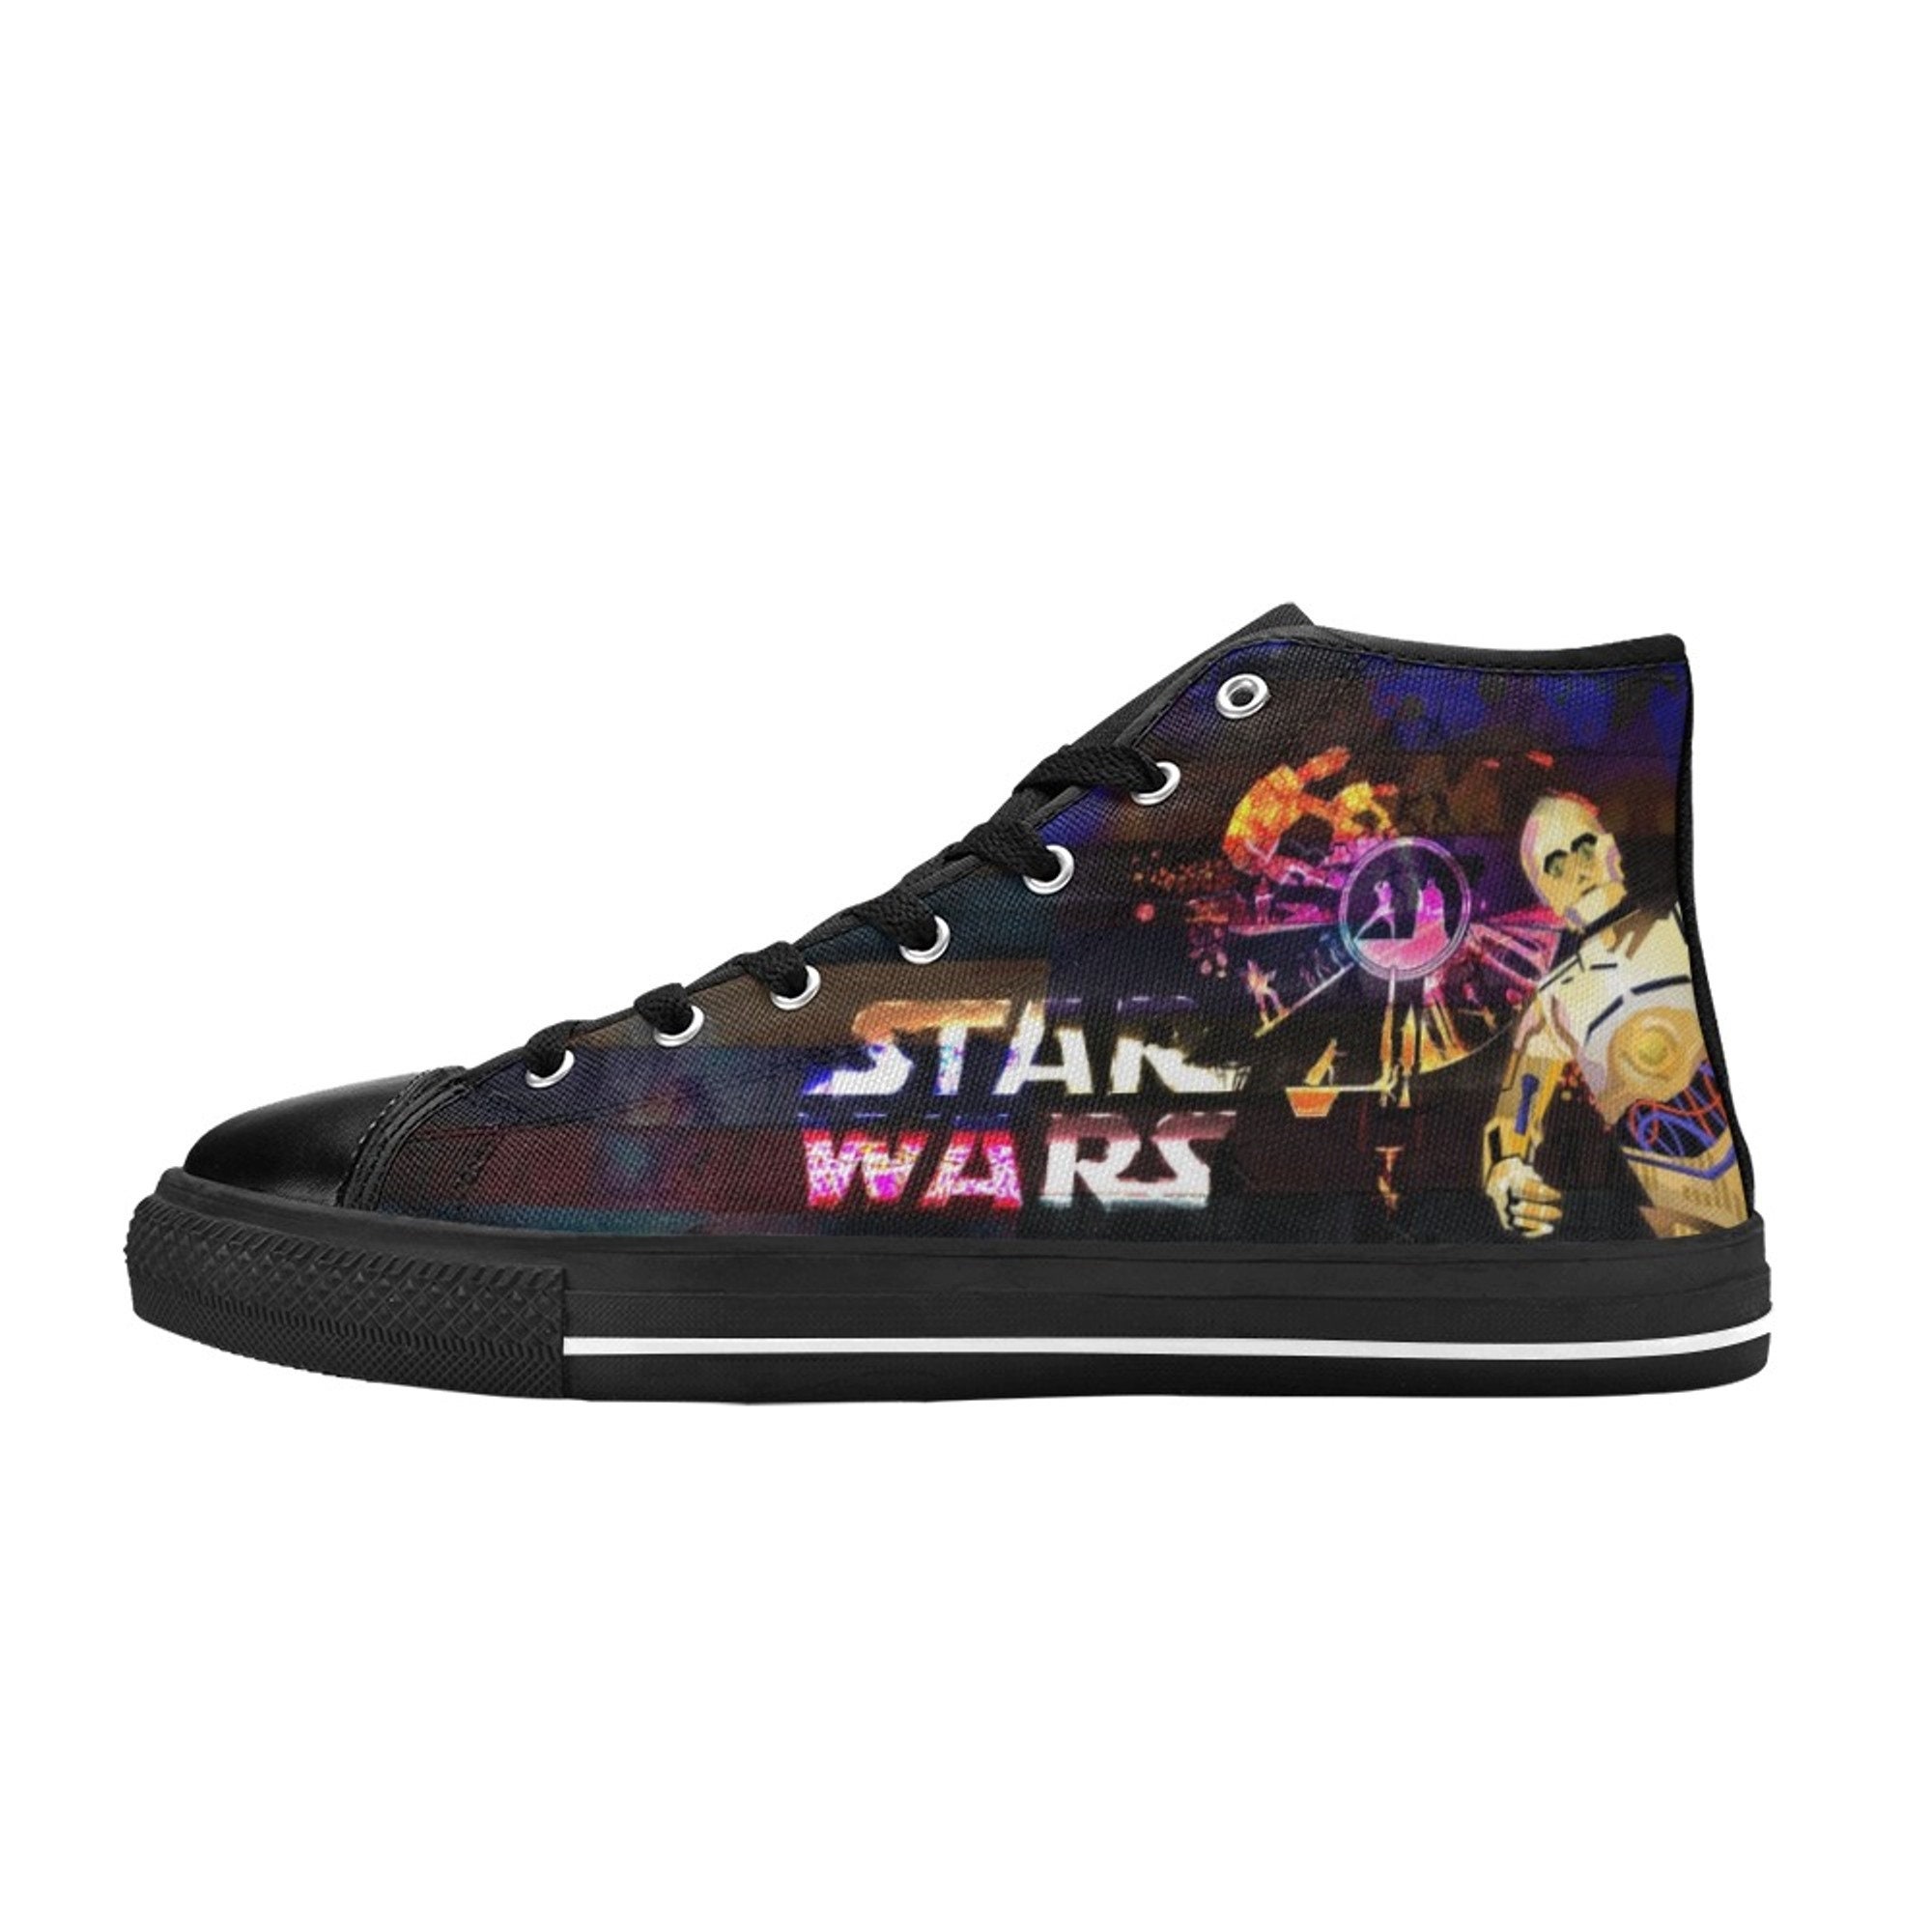 Star Wars Shoes Custom Unisex Adult Shoes, Canvas Shoes High Top